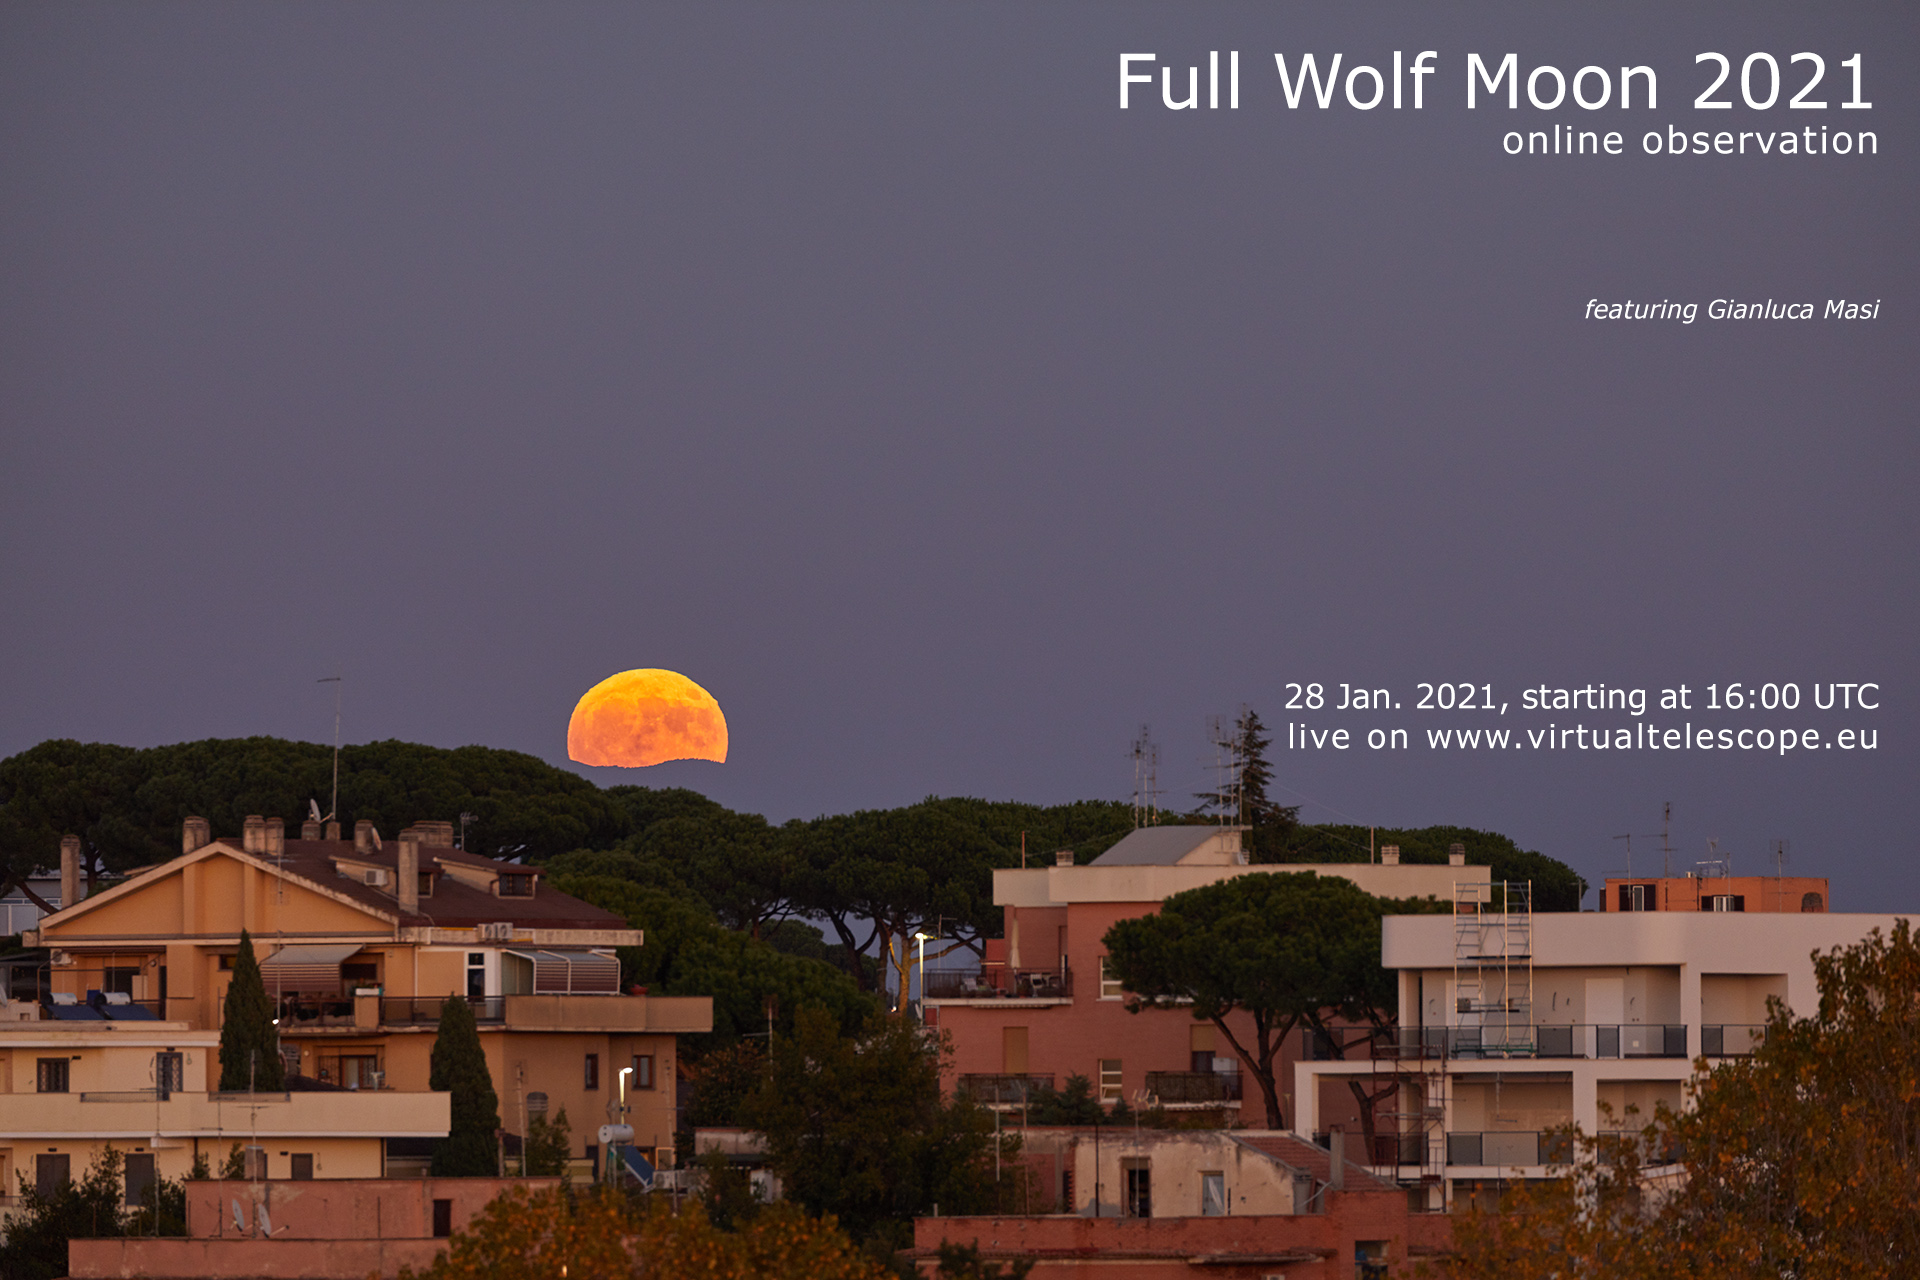 Full Wolf Moon 2021: poster of the event